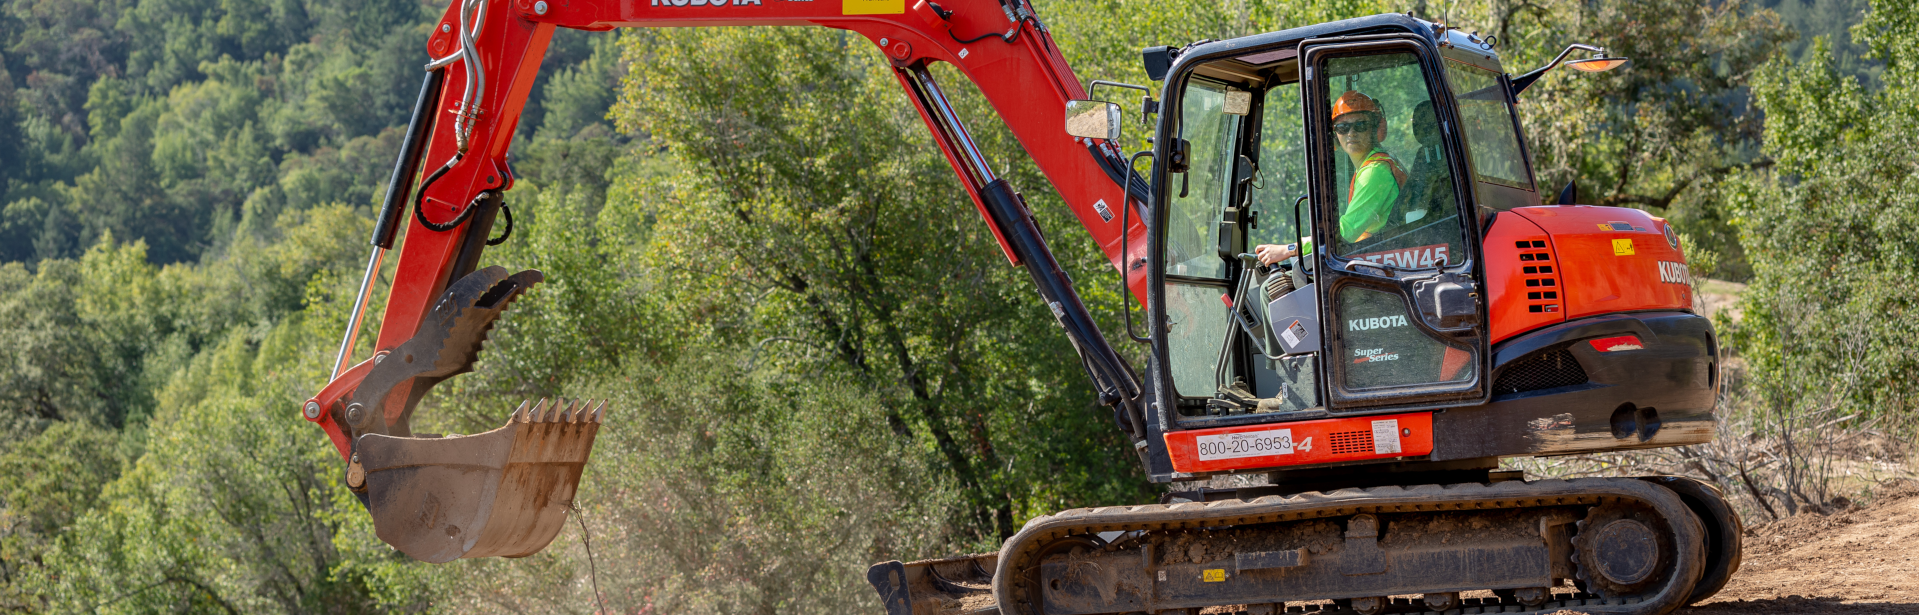 Marin County Parks employee operating a backhoe in Marin County Open Space